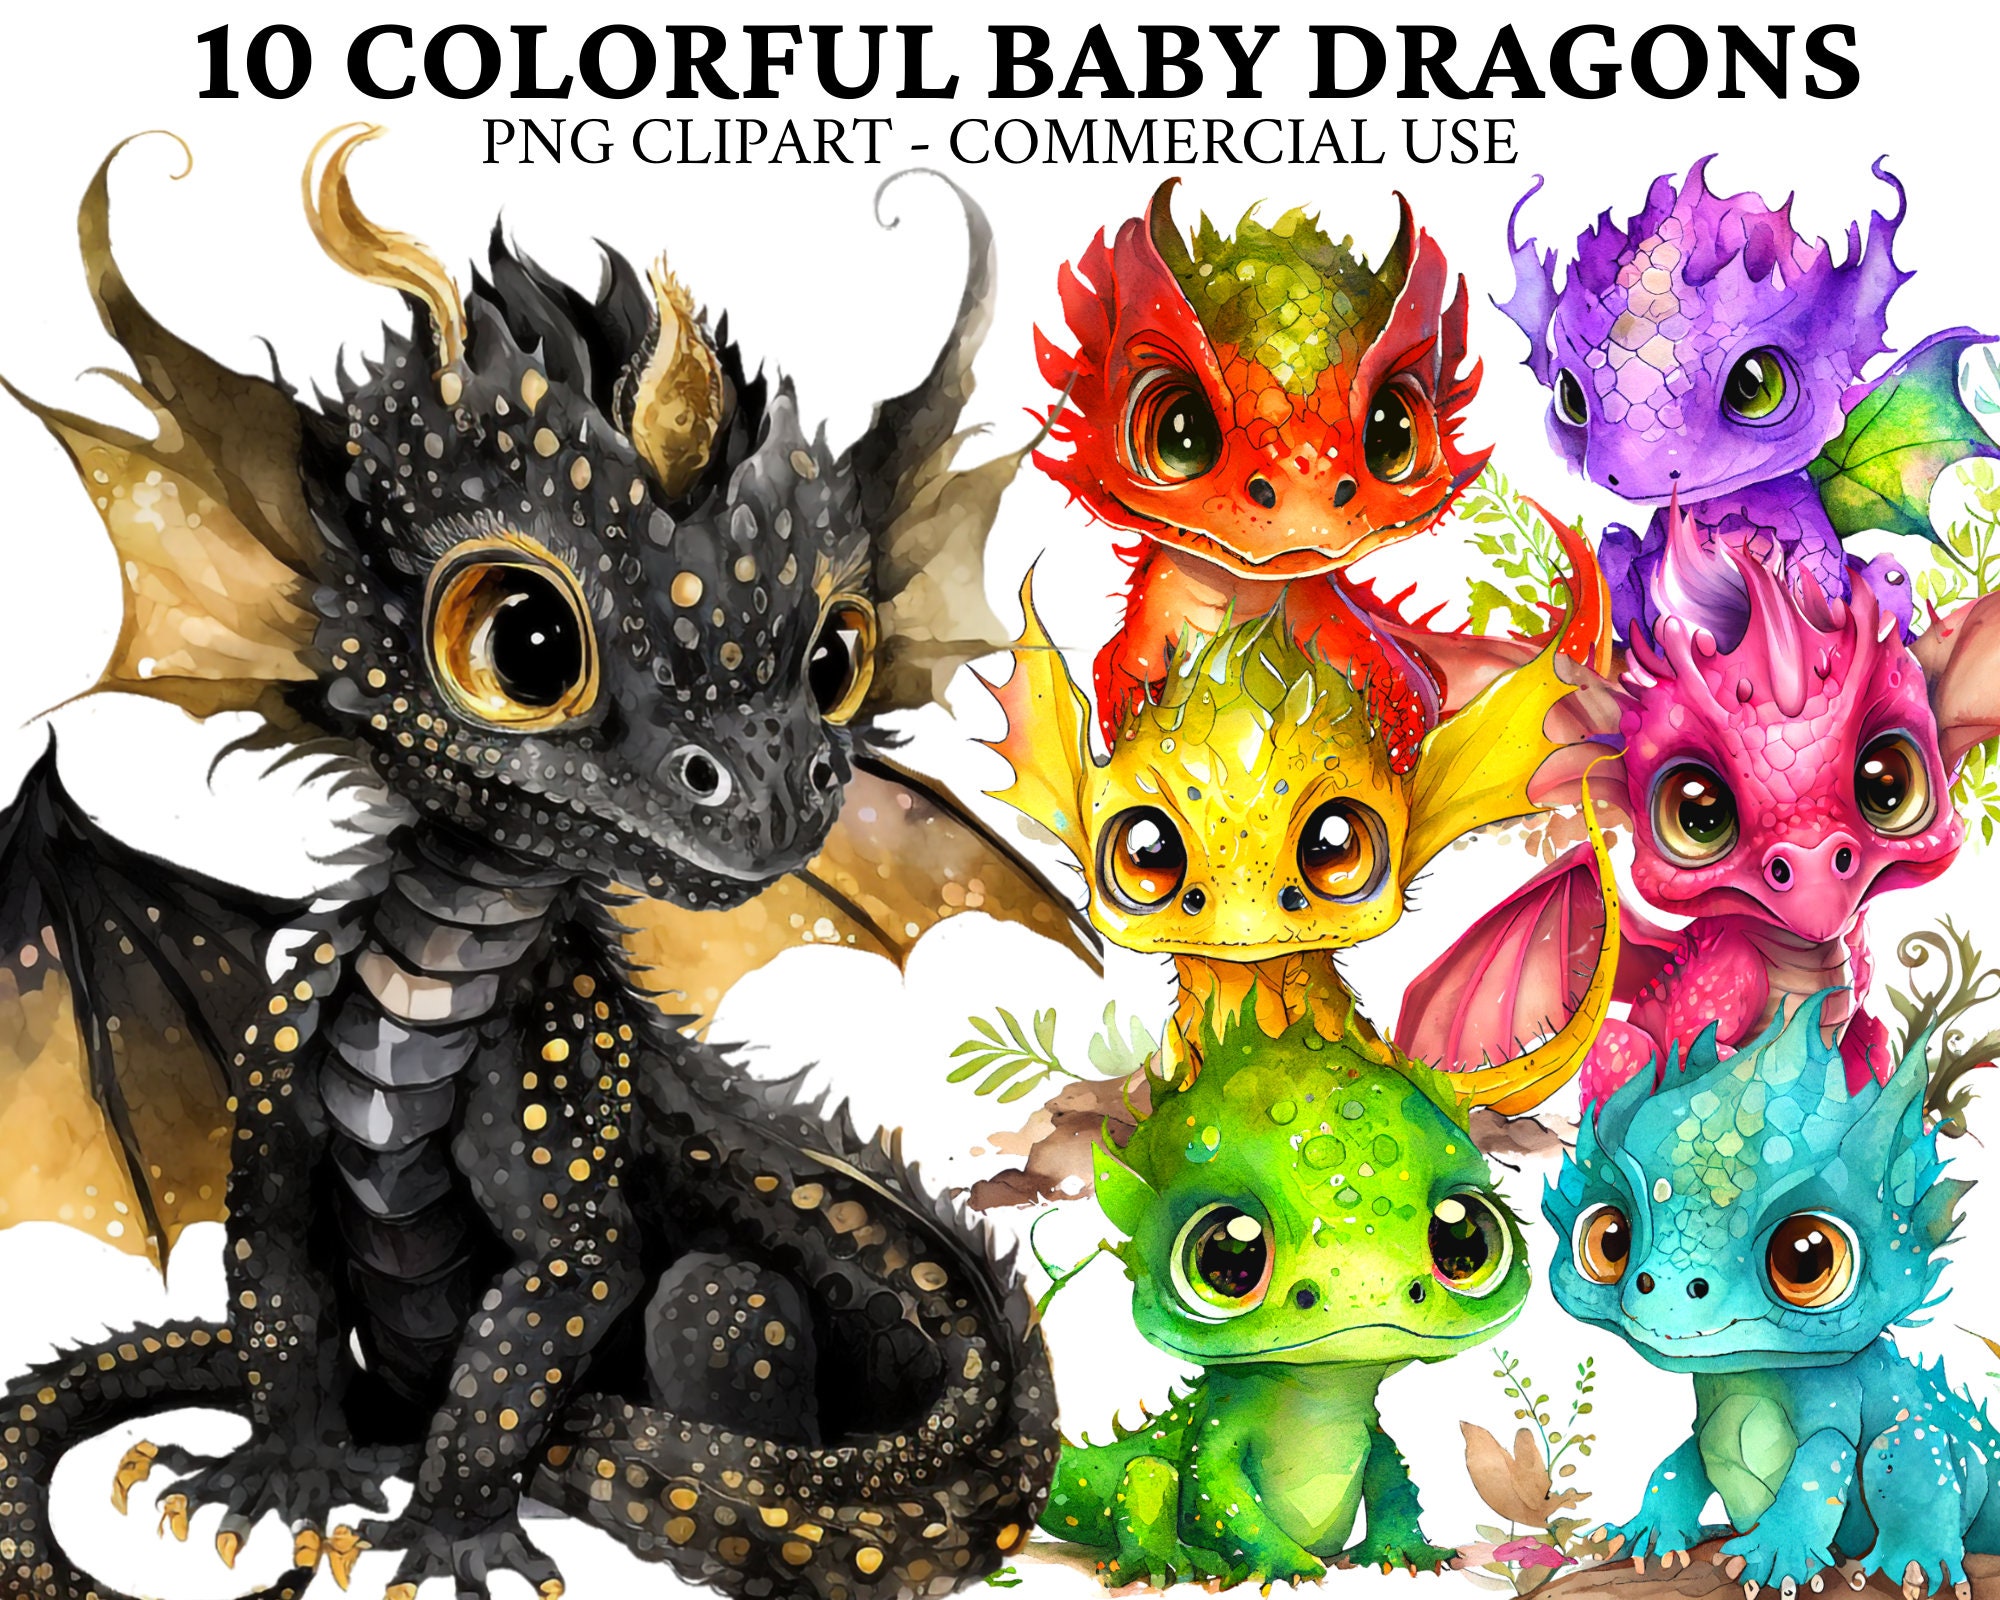 Chinese dragons clipart - Celebration clipart - Watercolor images